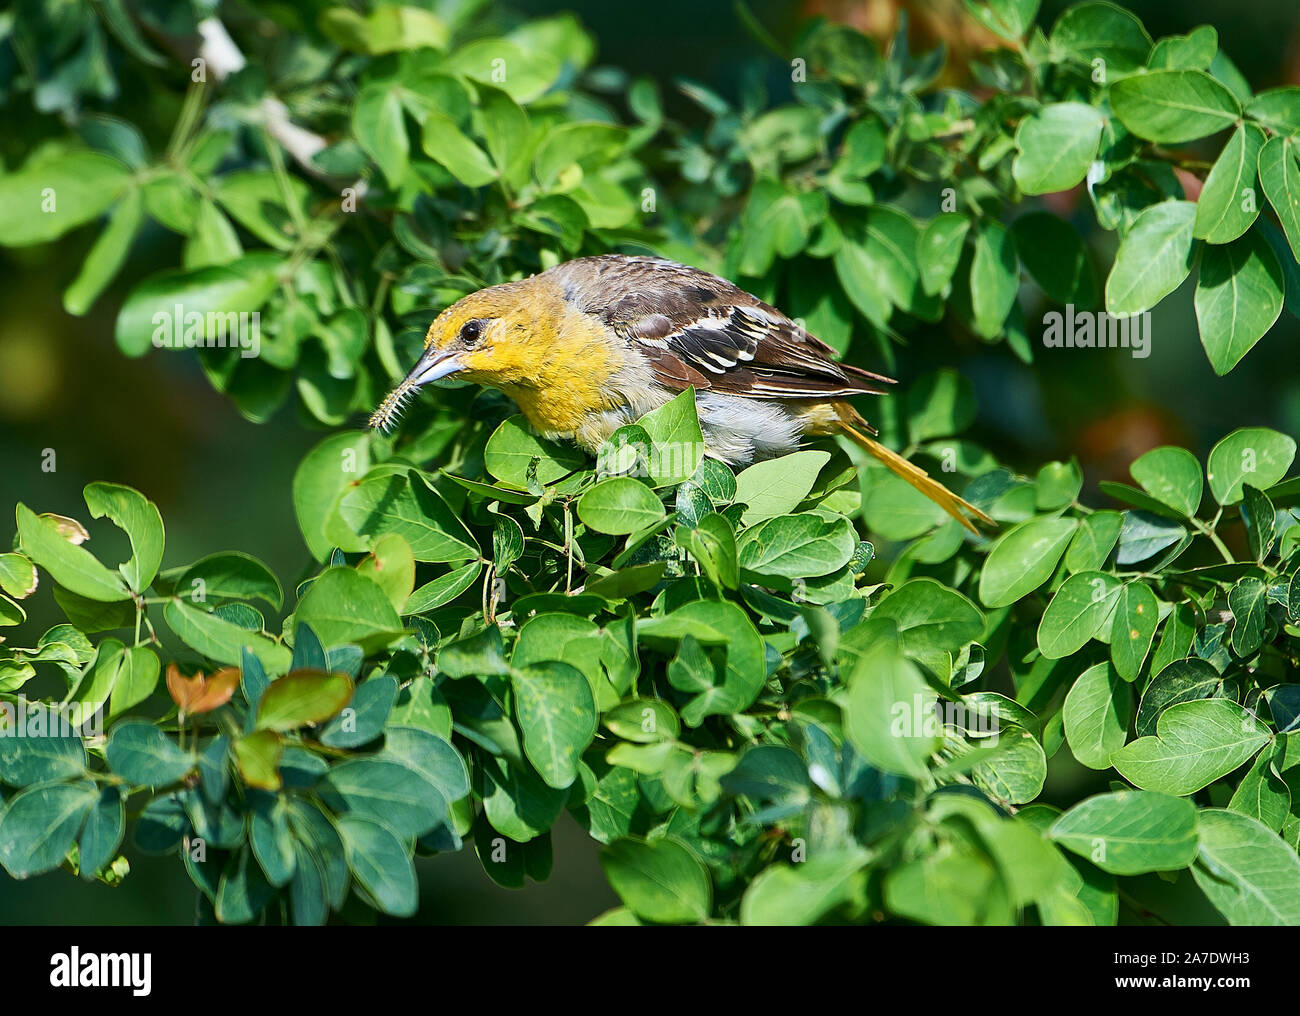 Female Bullock's Oriole (Icterus bullockii) searching for grubs and insects in a tree, Jocotopec, Jalisco, Mexico Stock Photo